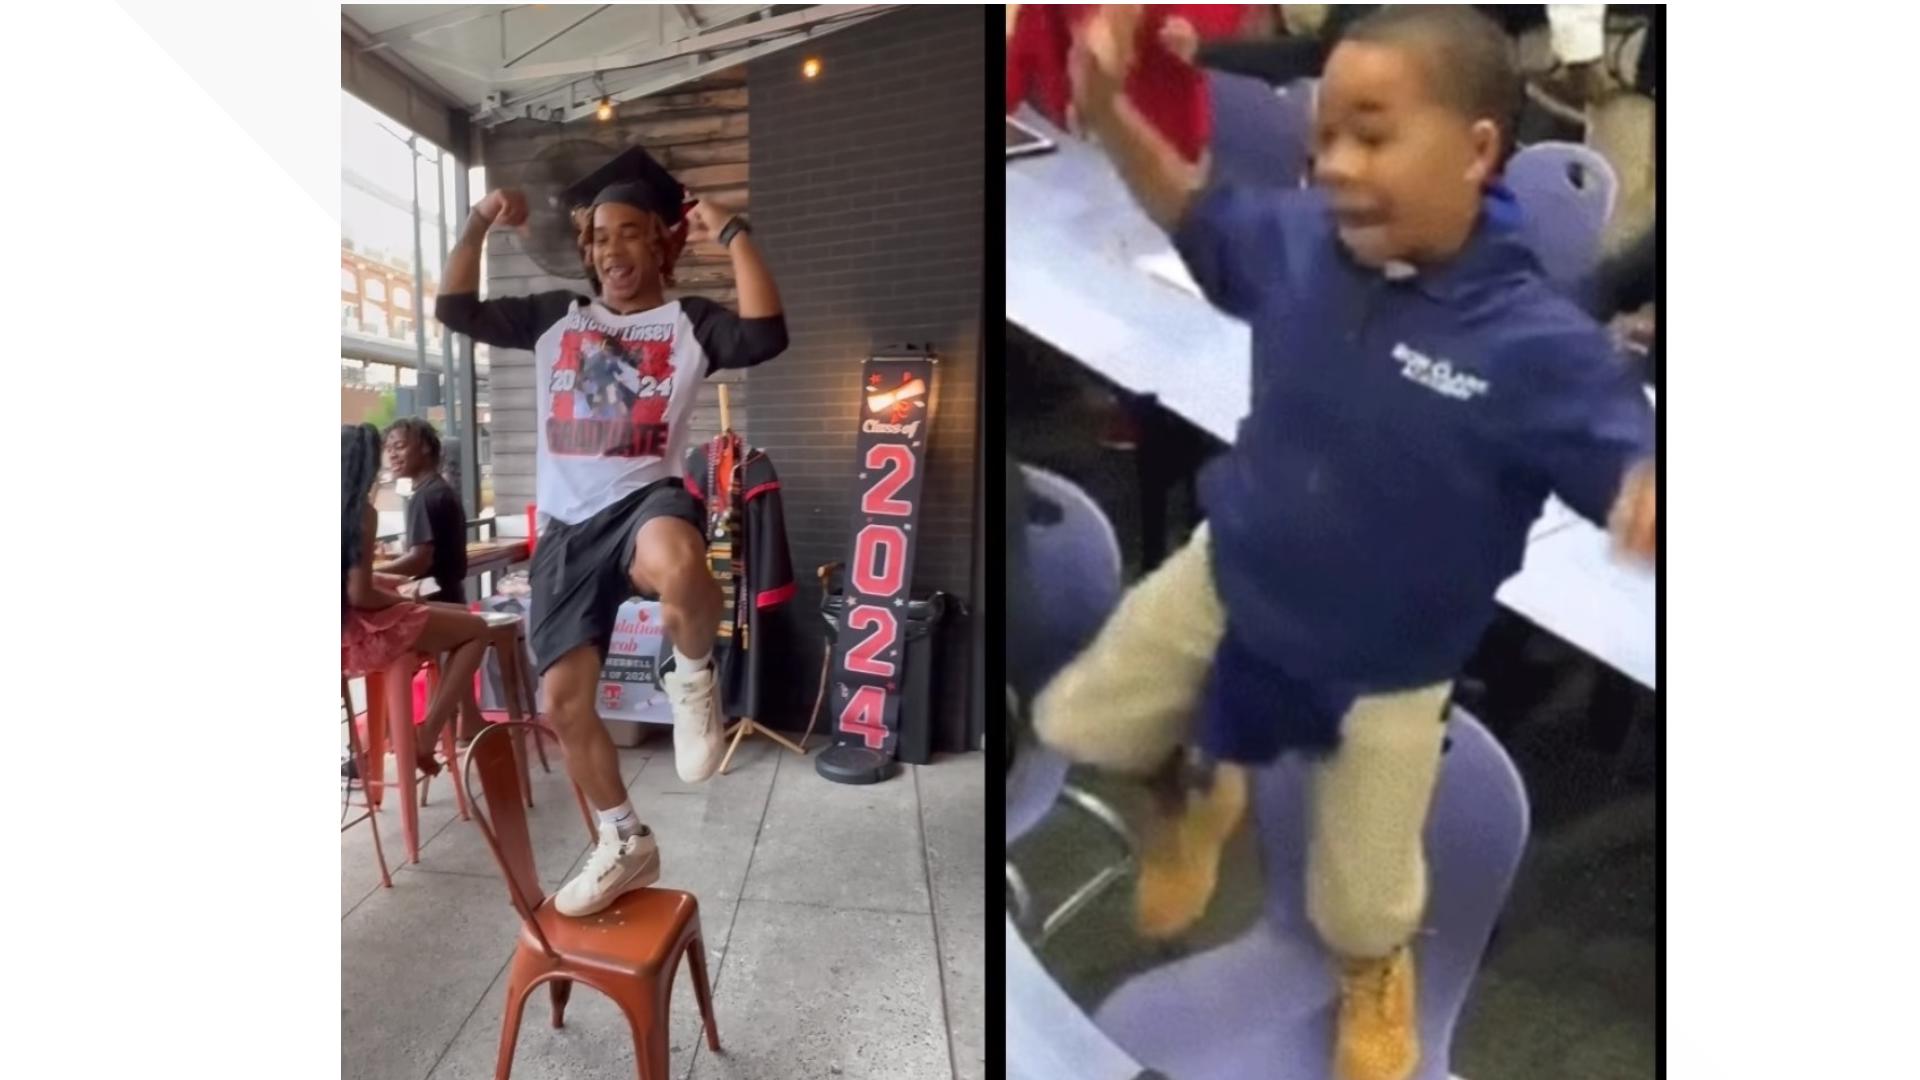 Jaycob Linsey was 12 years old and in the 6th grade when this viral moment happened. Now, he's graduating from high school.